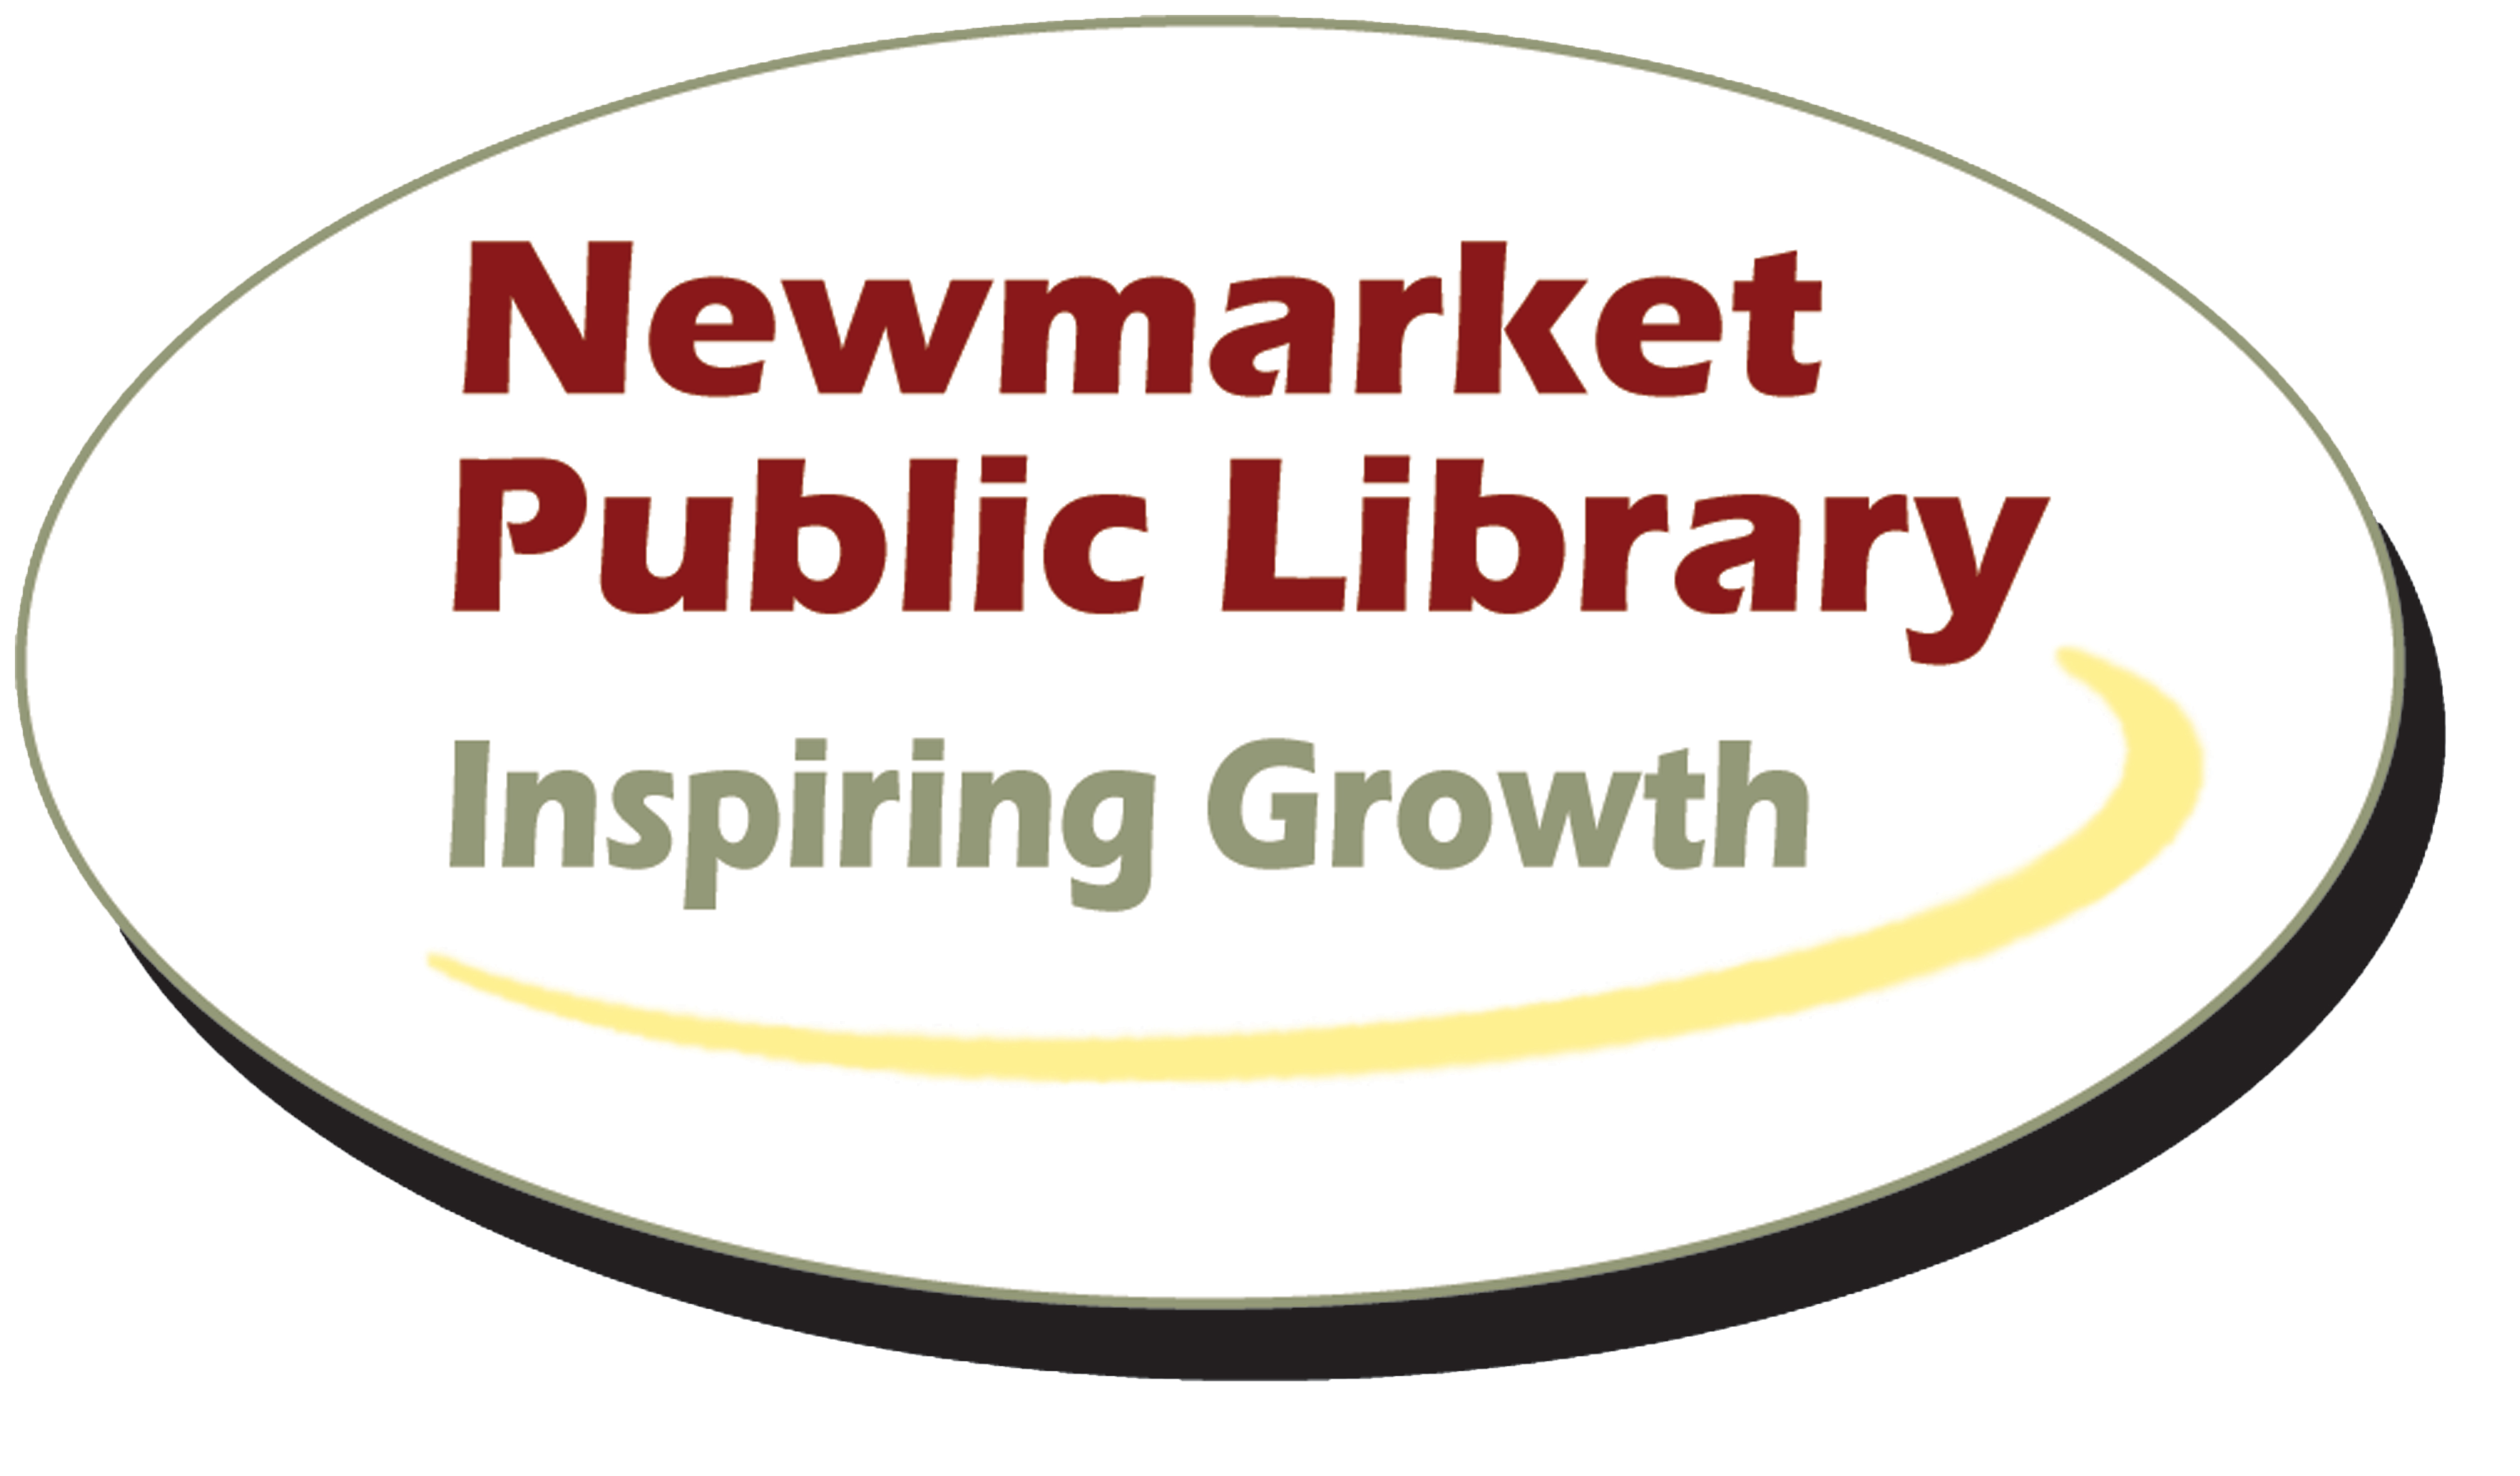 Newmarket Public Library